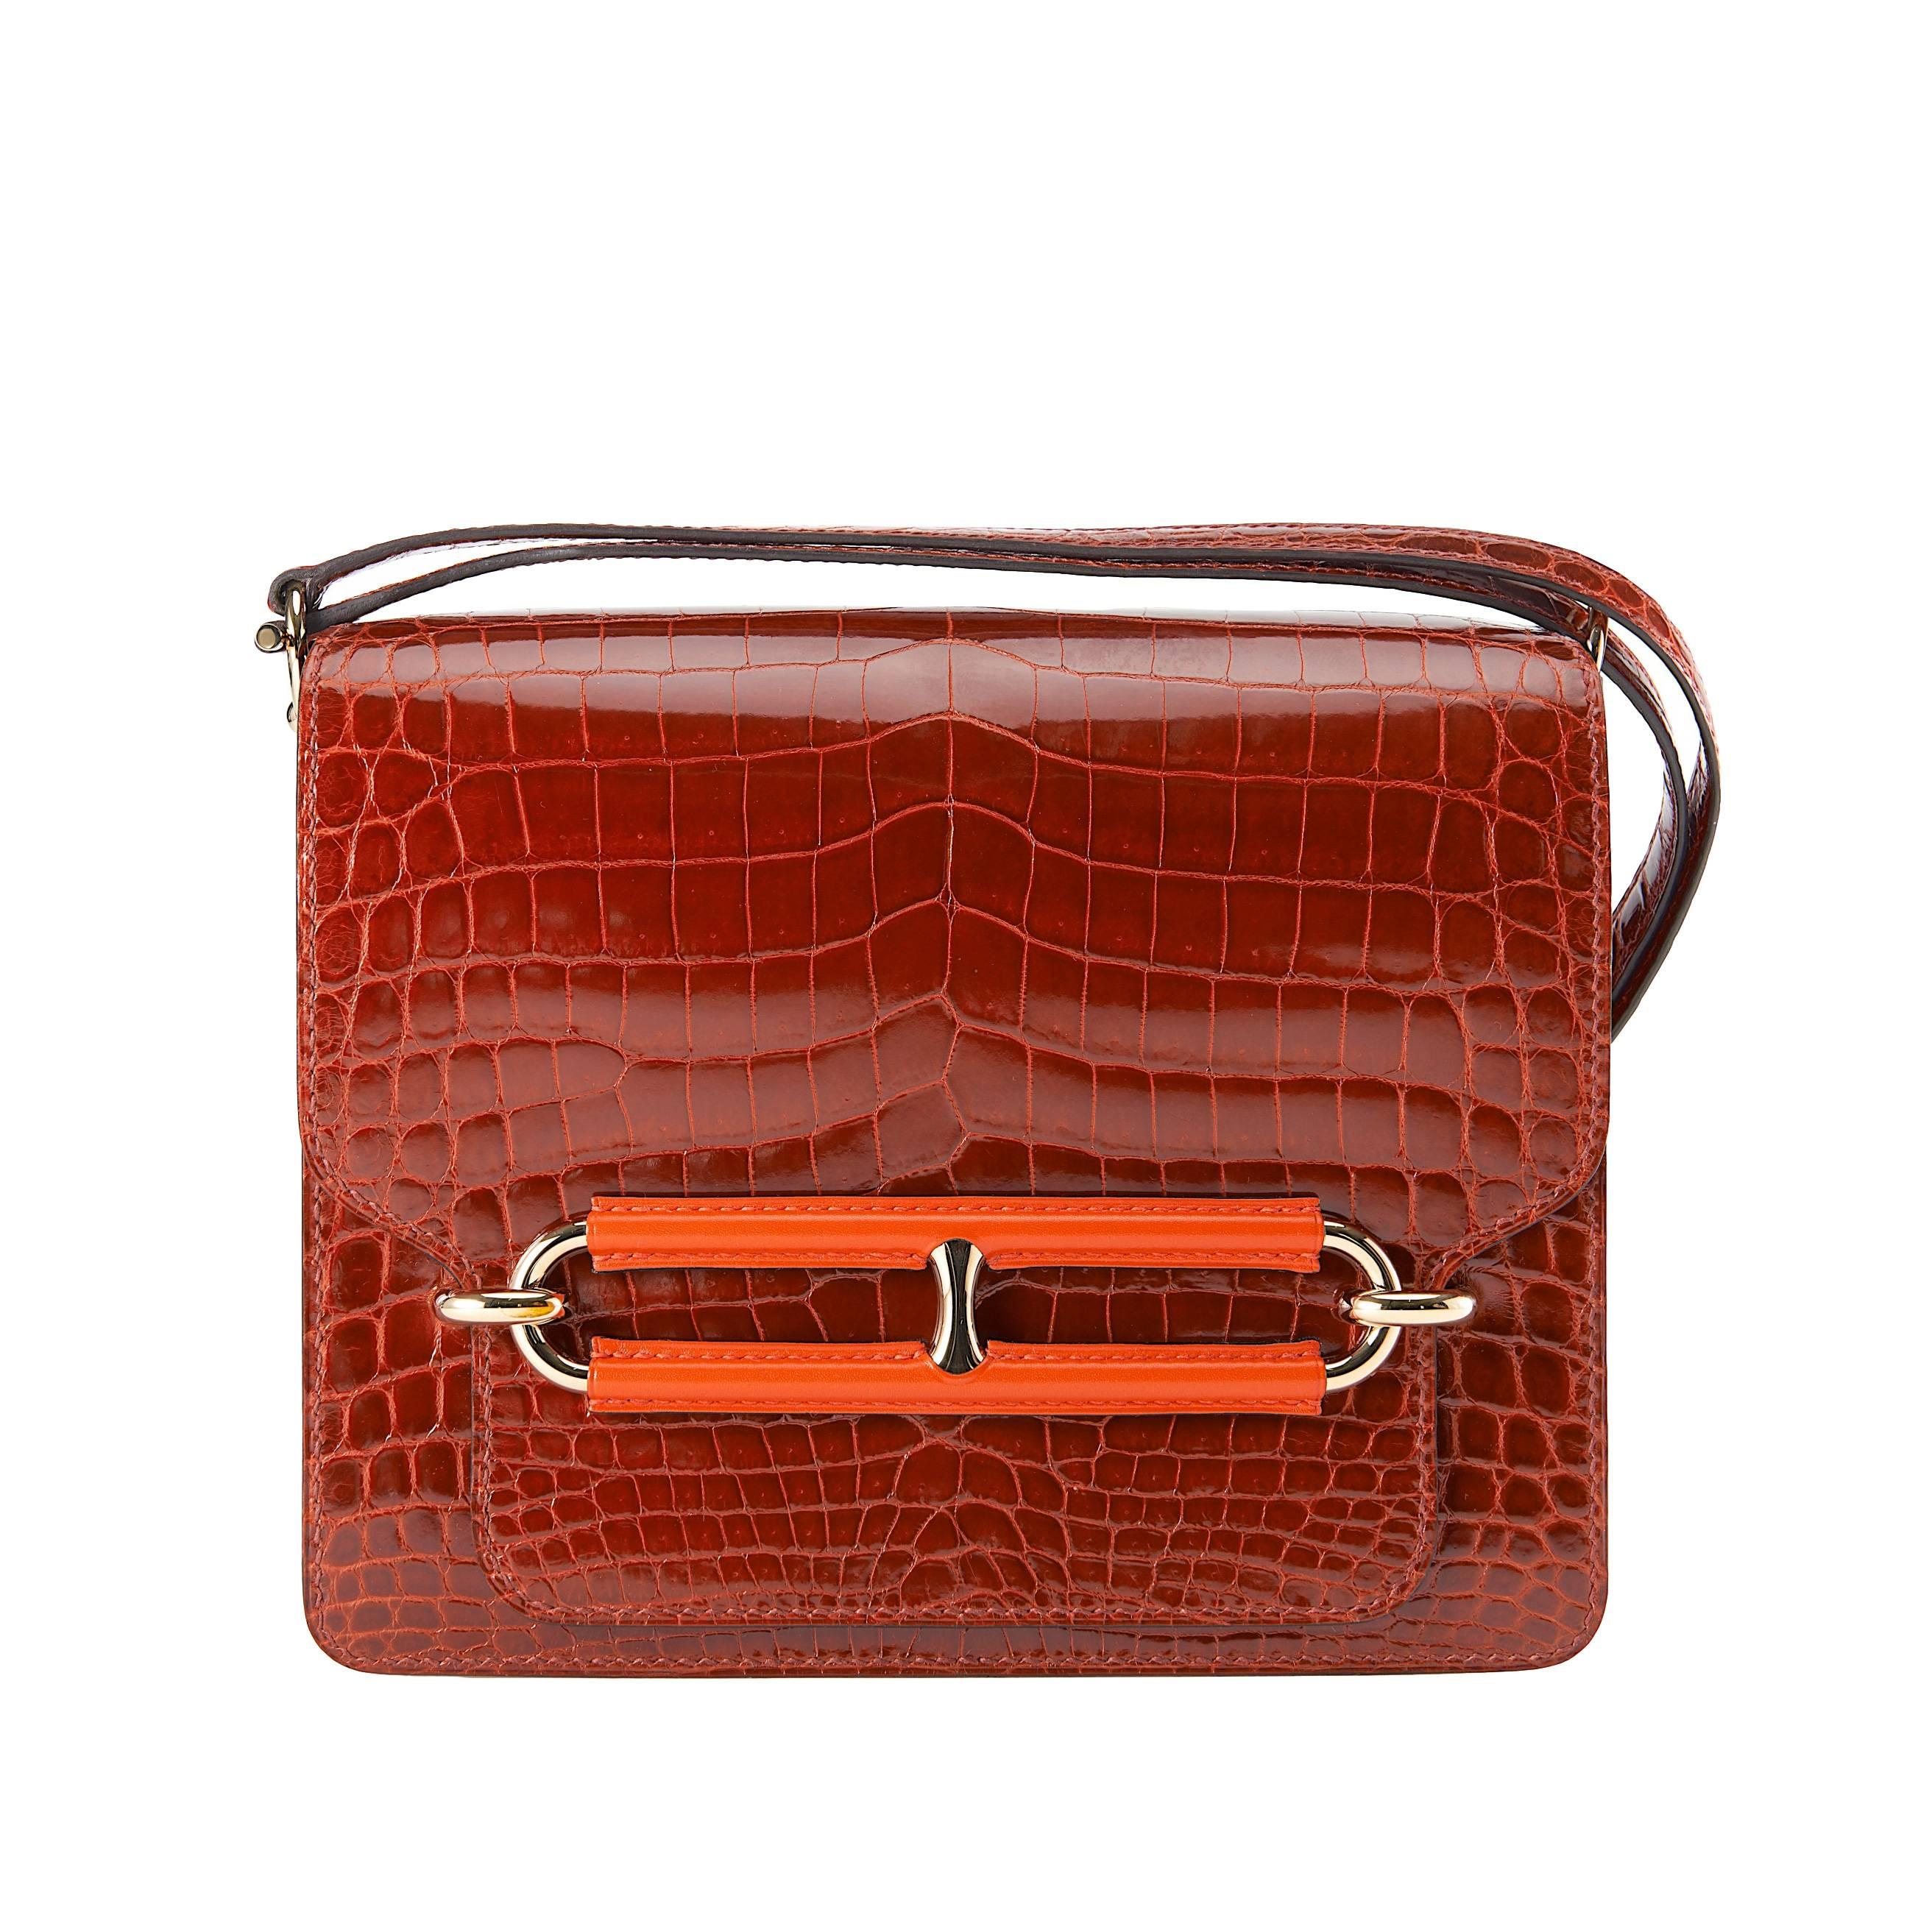 HERMES ROULIS BAG SHINY ROUGE H NILO CROCODILE W PERMABRASS HARDWARE JaneFinds